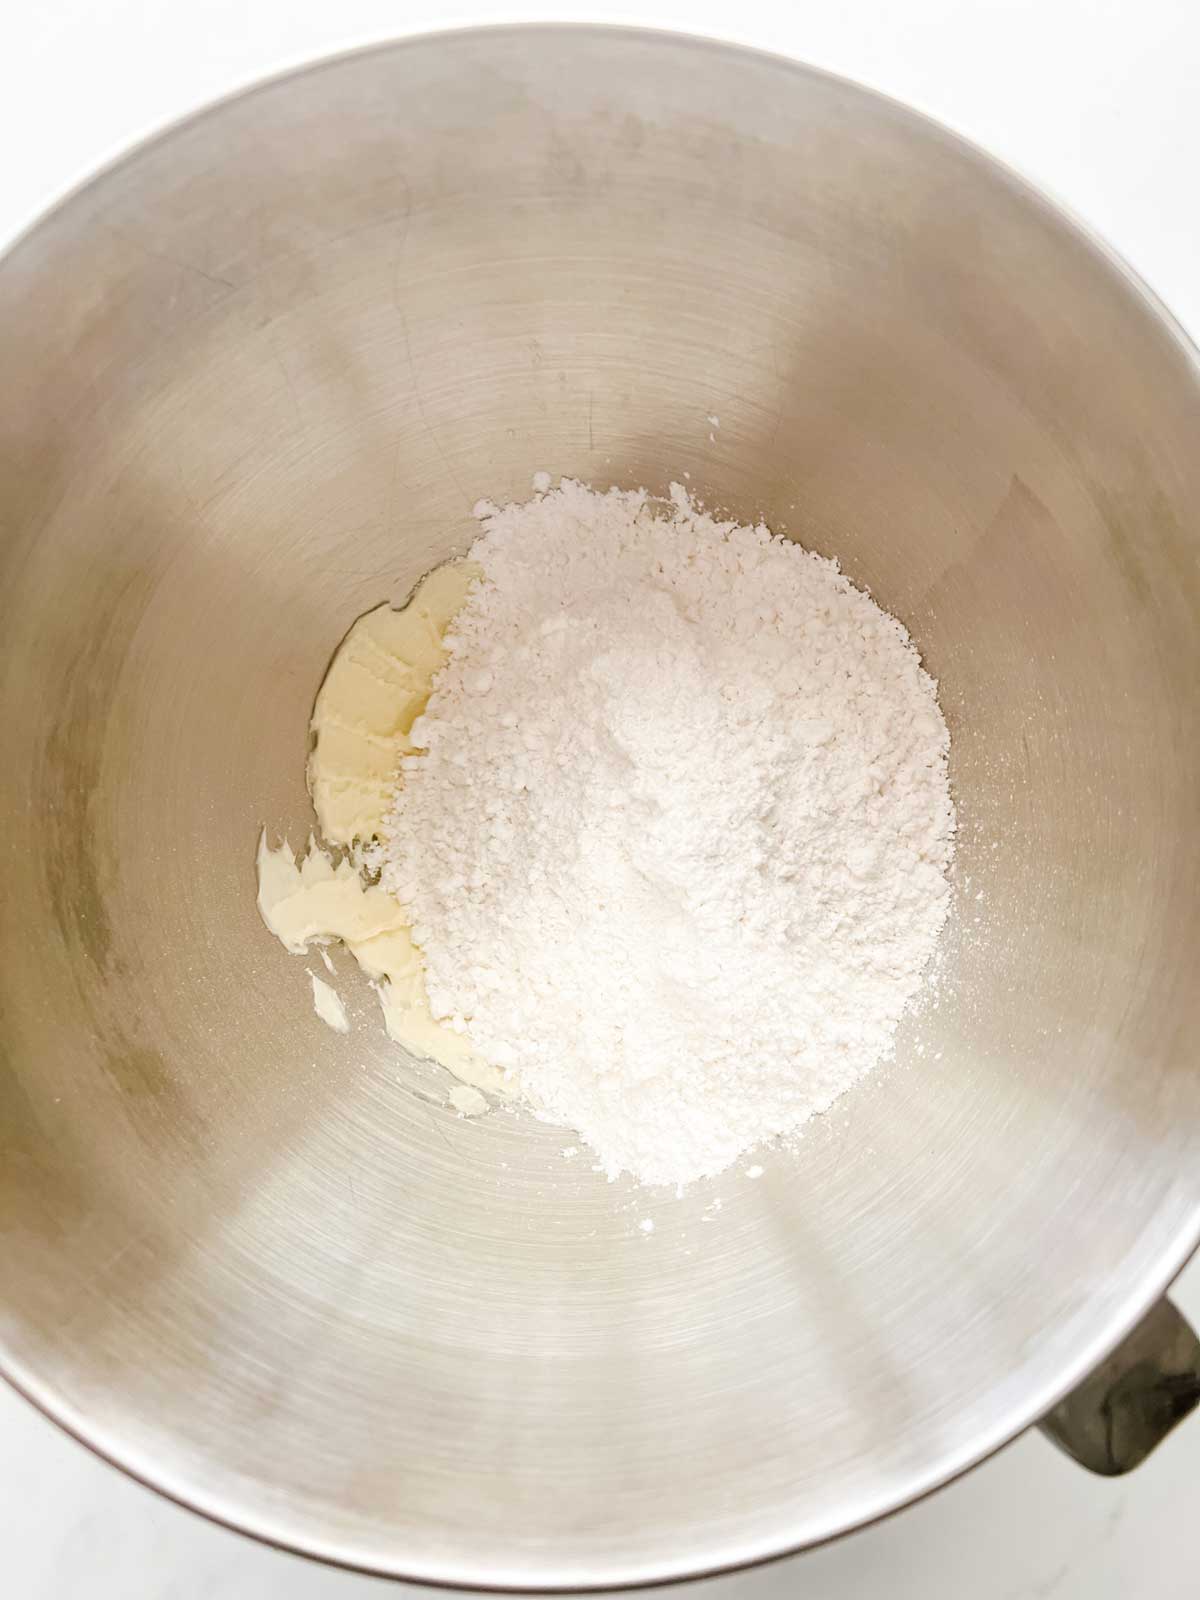 Creamed butter and powdered sugar in the bowl of a stand mixer.